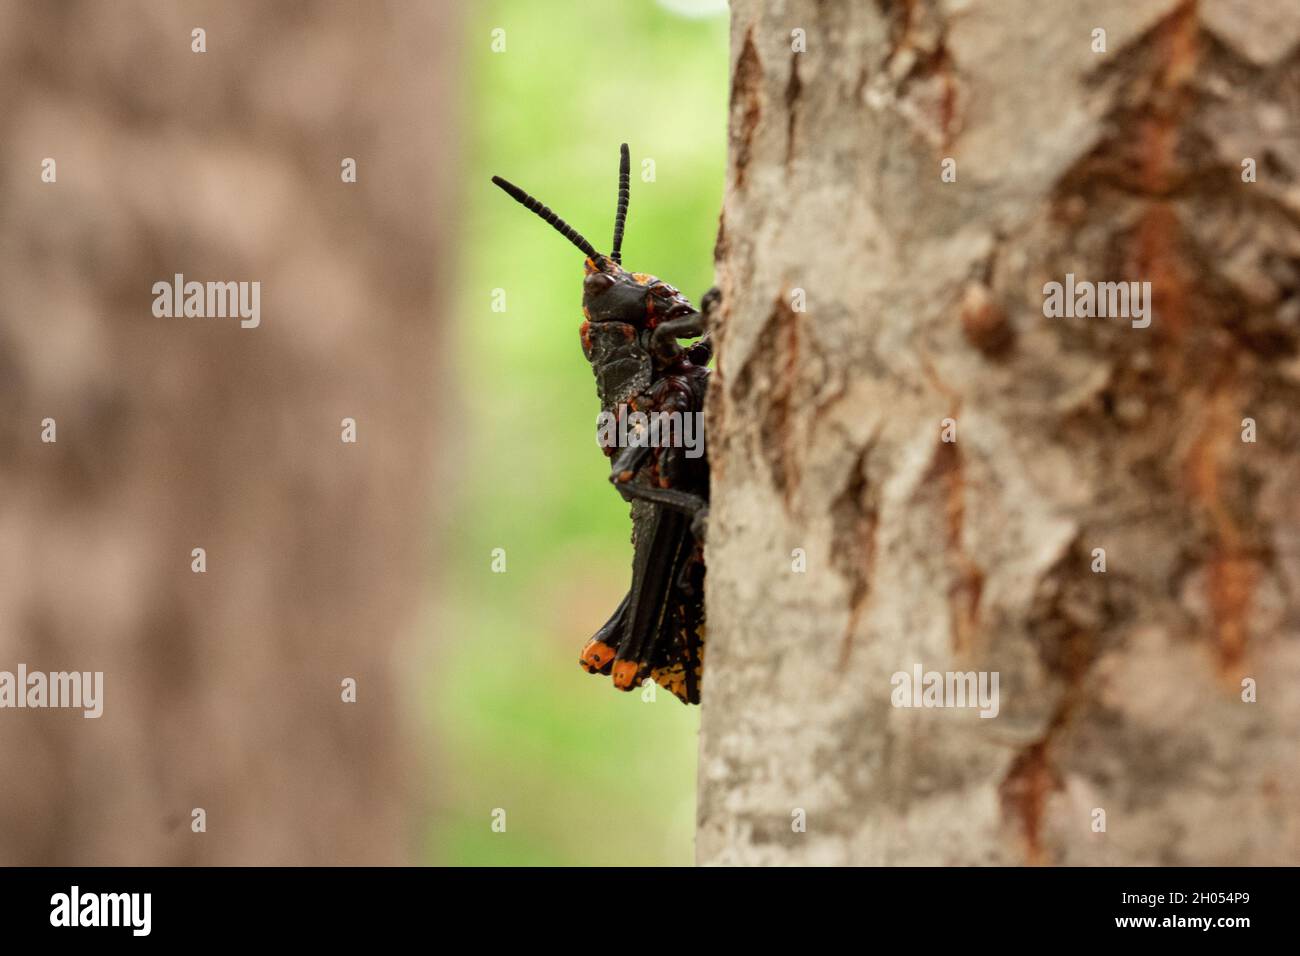 A grasshopper climbs up a tree in the forest, taken in South Africa. Stock Photo